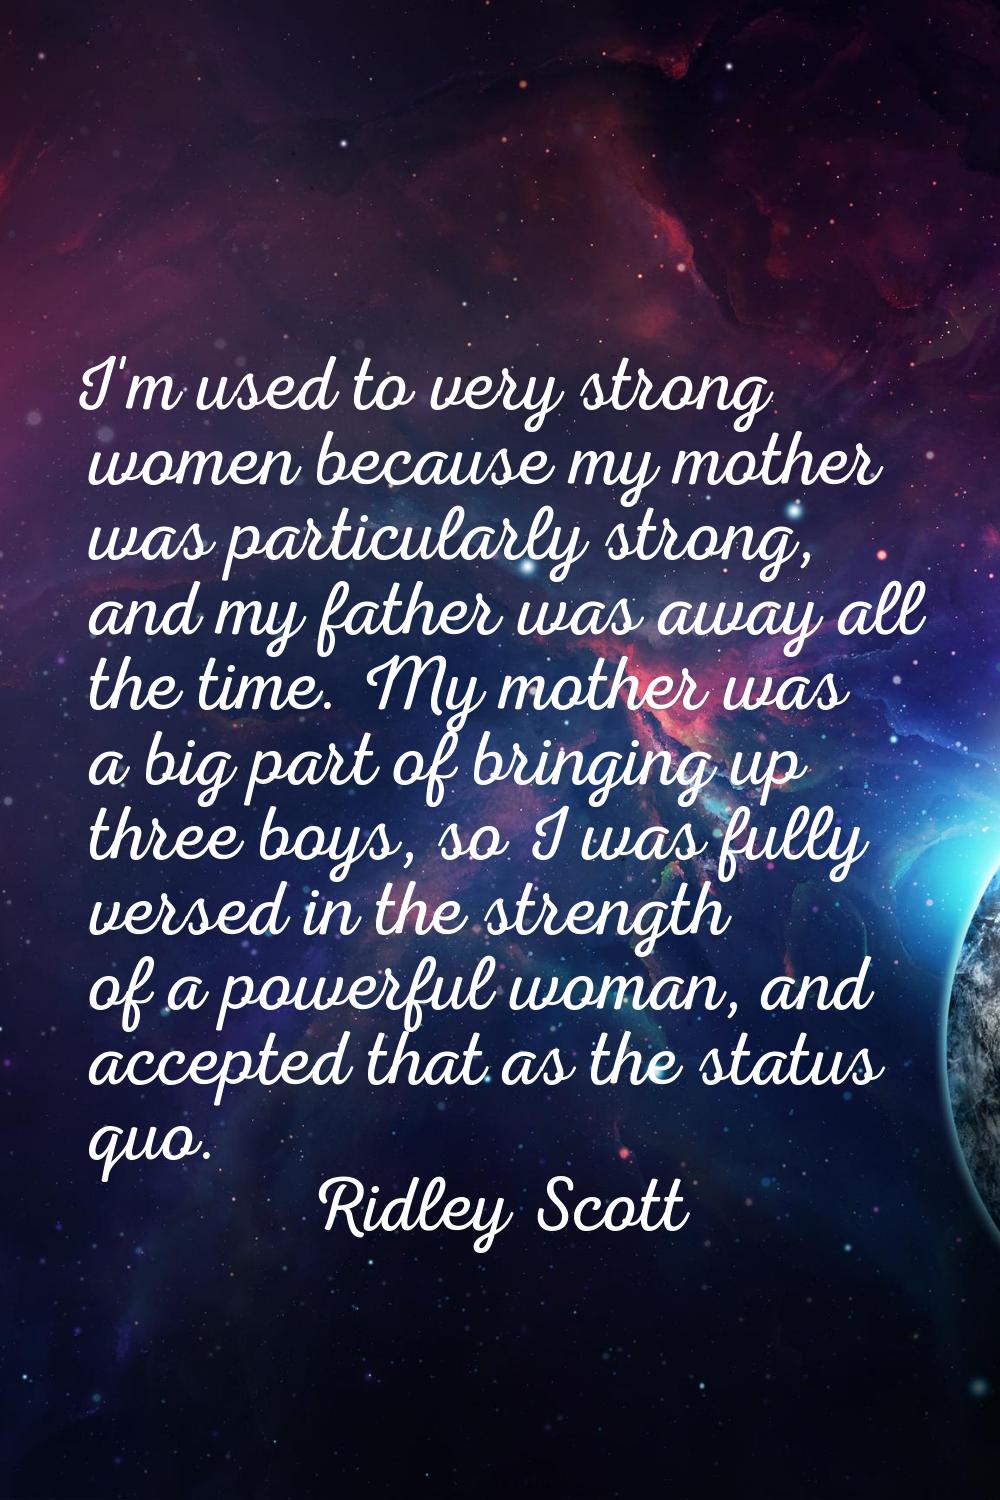 I'm used to very strong women because my mother was particularly strong, and my father was away all